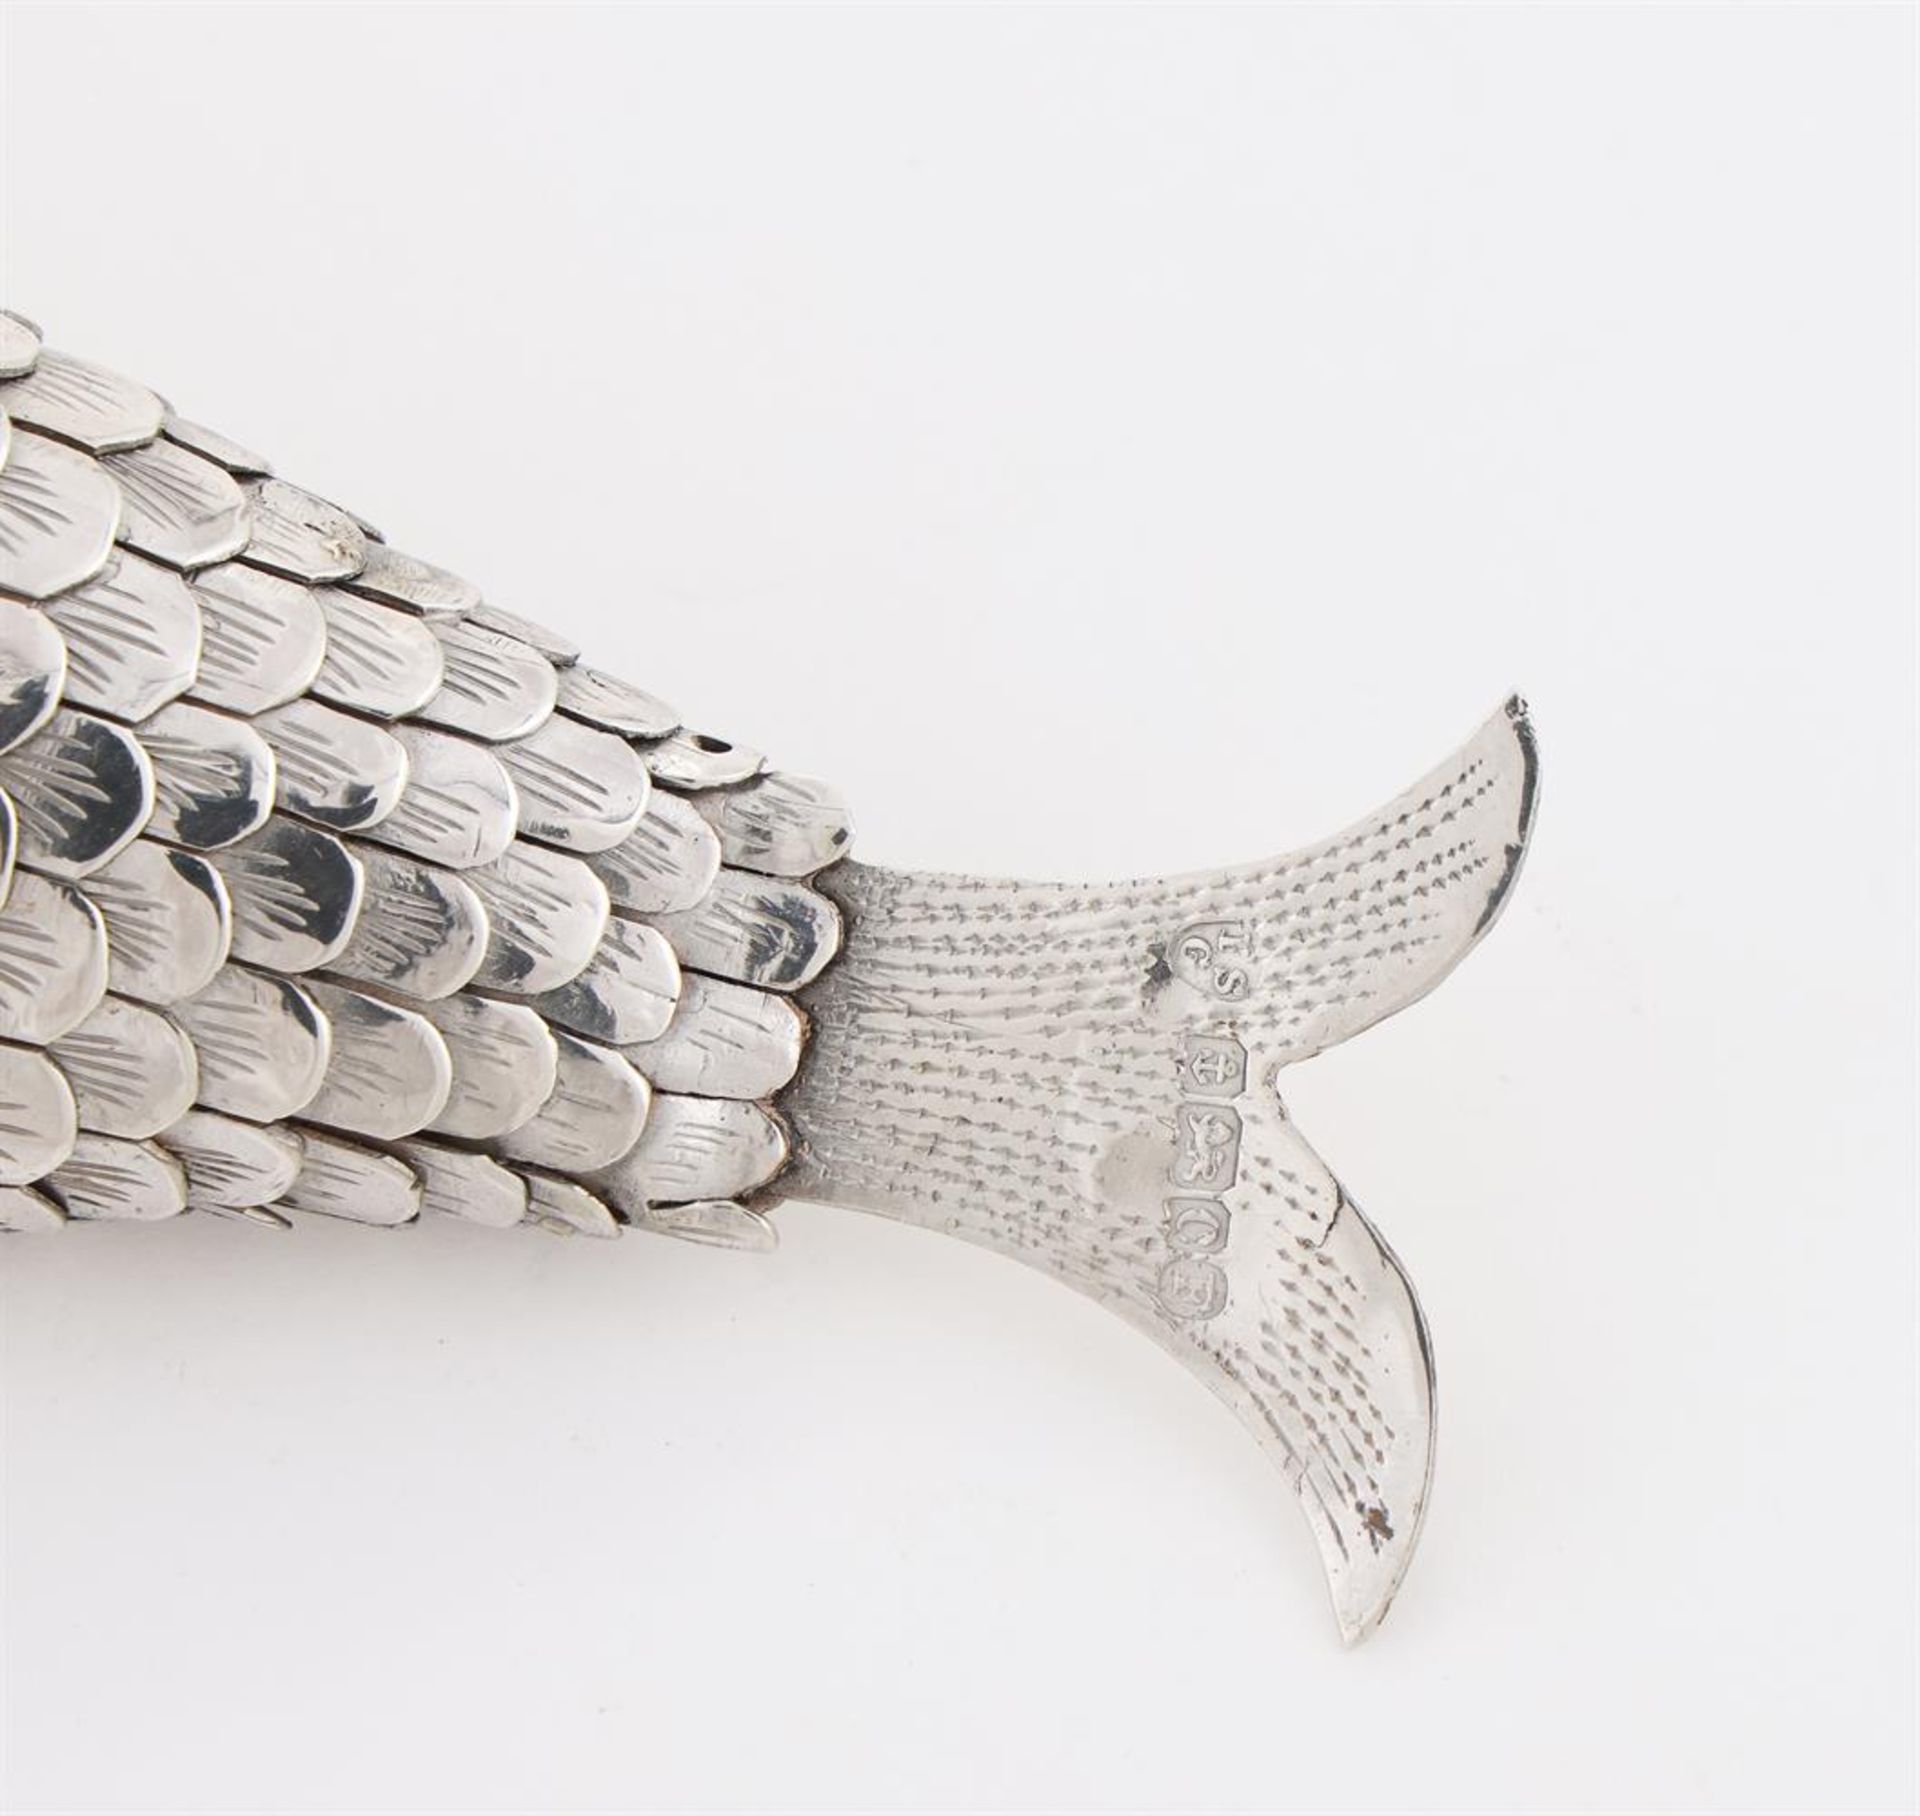 A SILVER ARTICULATED FISH BOX, SPONSOR'S MARK FOR I. S. GREENBERG & CO. - Image 3 of 3